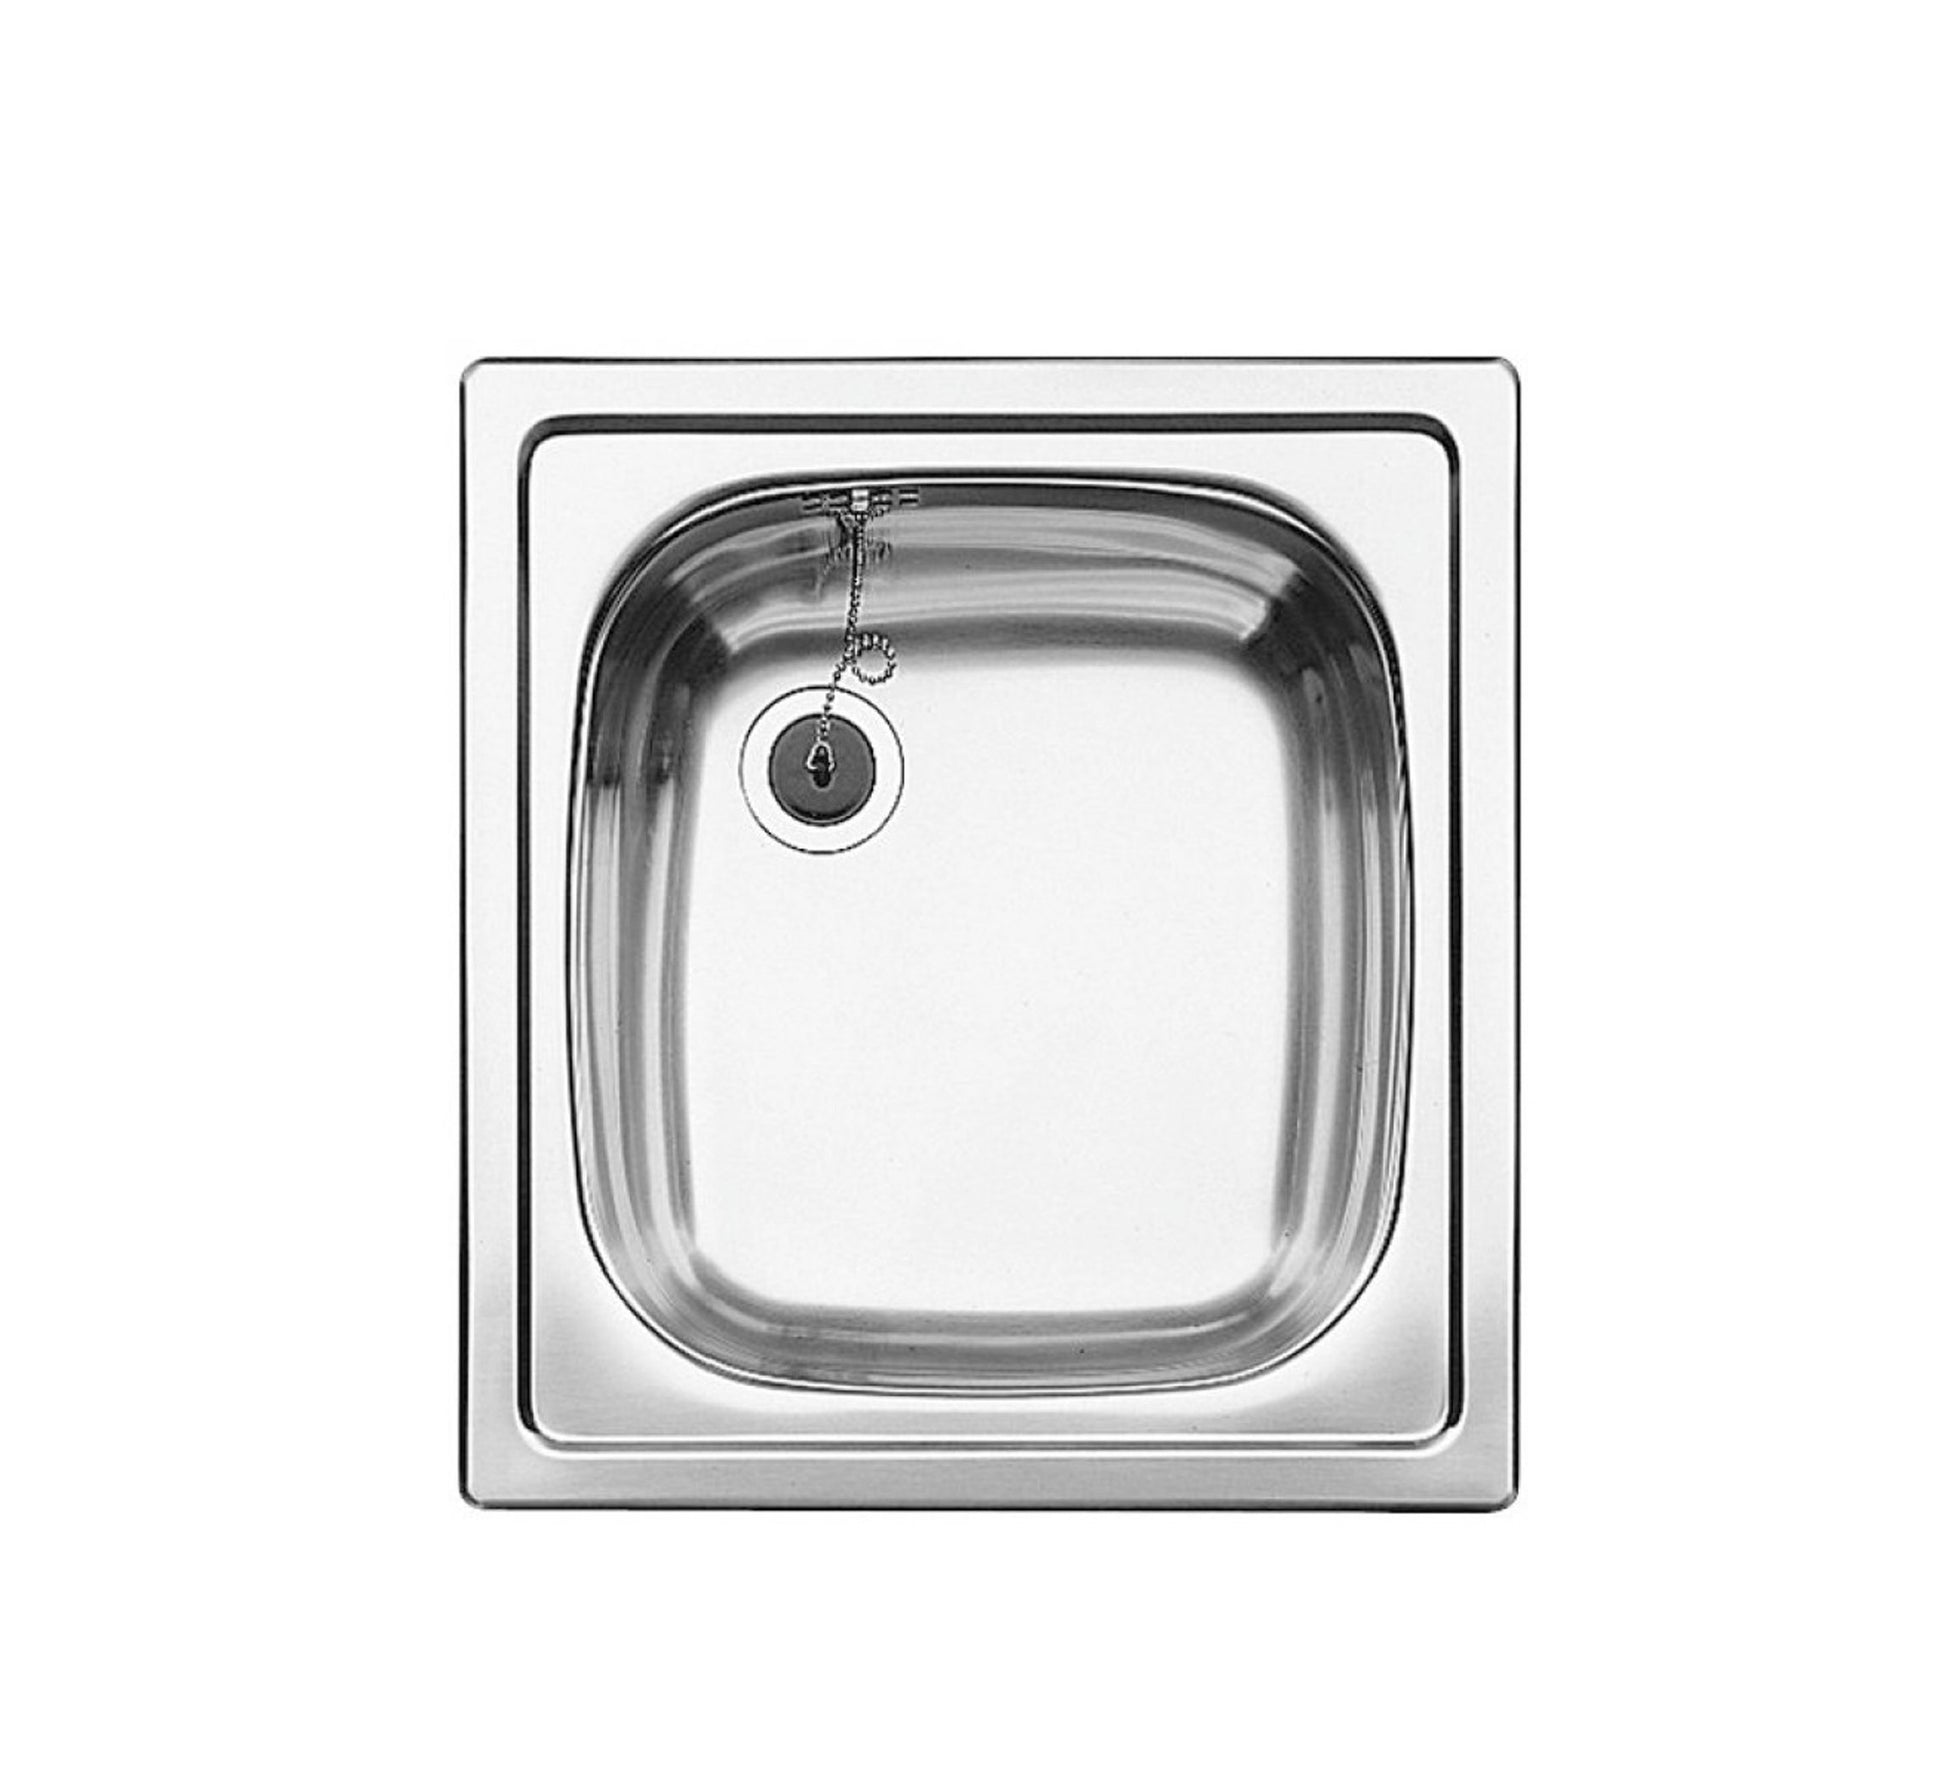 BLANCO TOP EE 4X4 KITCHEN SINK 1 BOWL WITH WASTE & OVER FITTINGS - 501065-222458 - Tadmur Trading